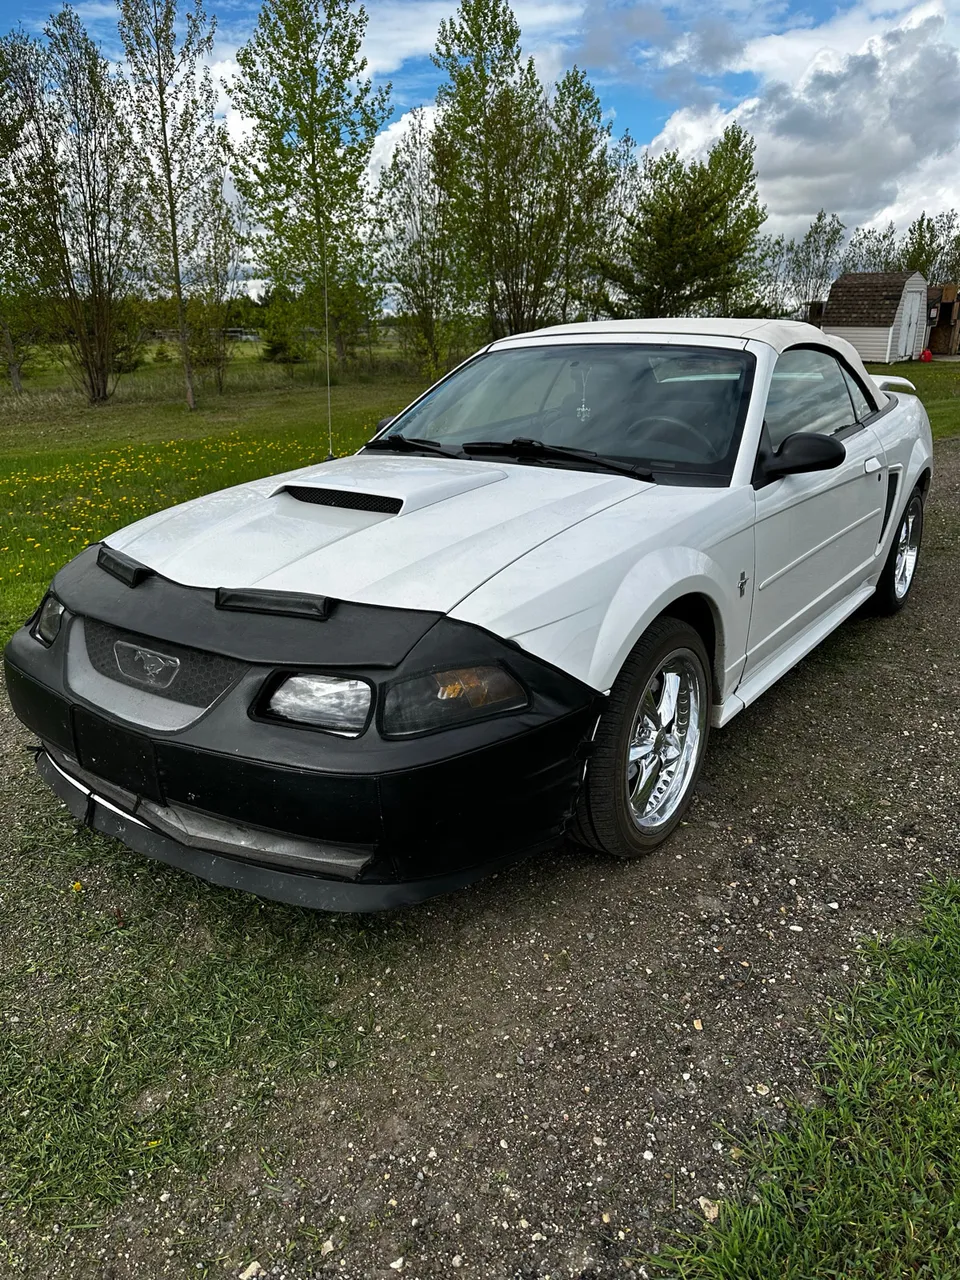 2003 Ford Mustang Covertible